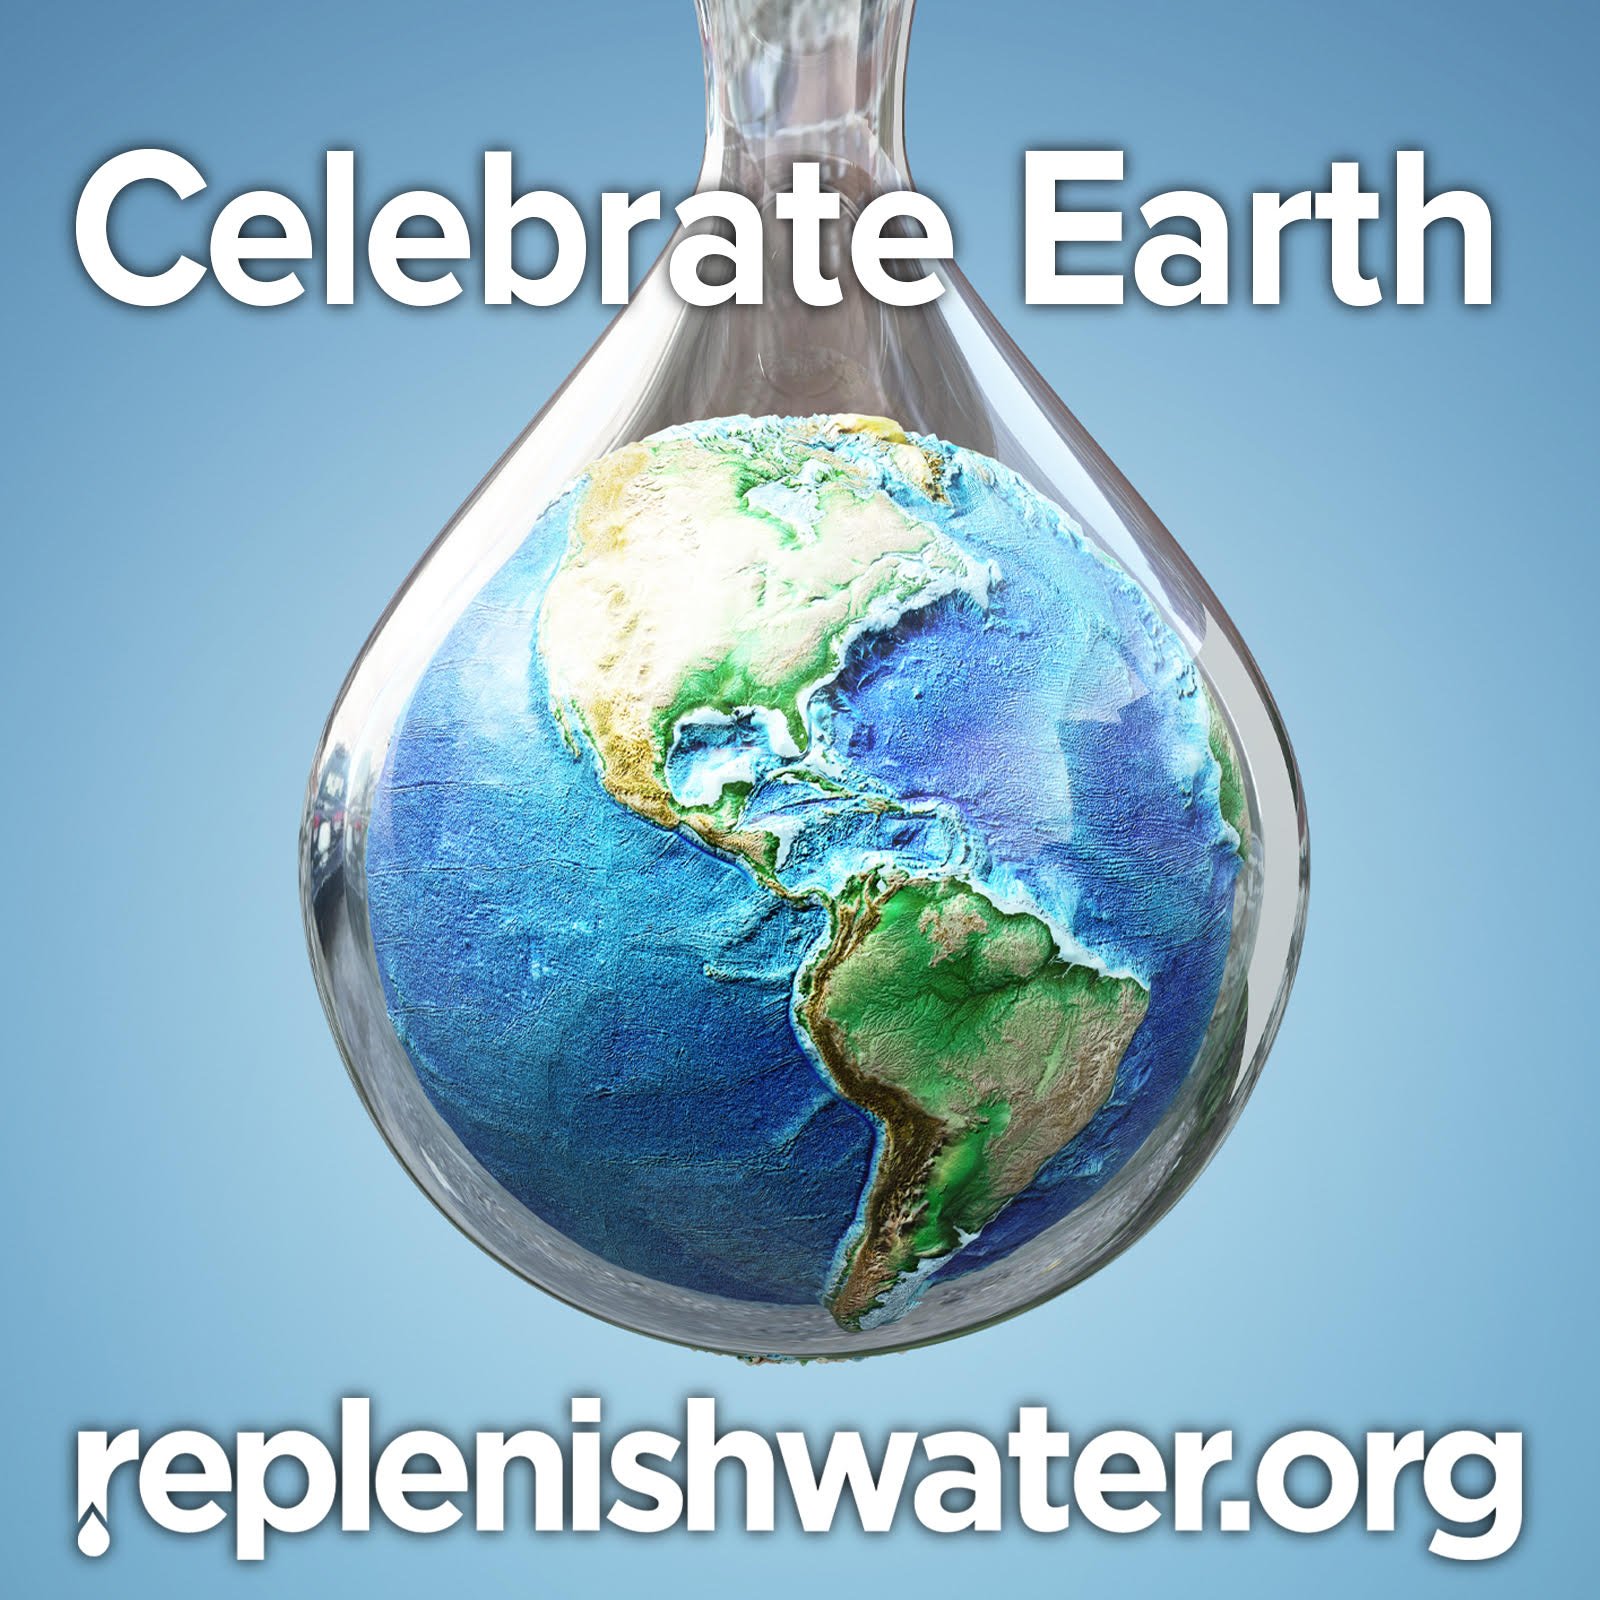 Celebrate Earth Day!  Although there is enough water for everyone on our planet, unfortunately there is not access to clean water for nearly a billion people (W.H.O.). Help us make a positive difference by sharing the gift of clean water to those in 